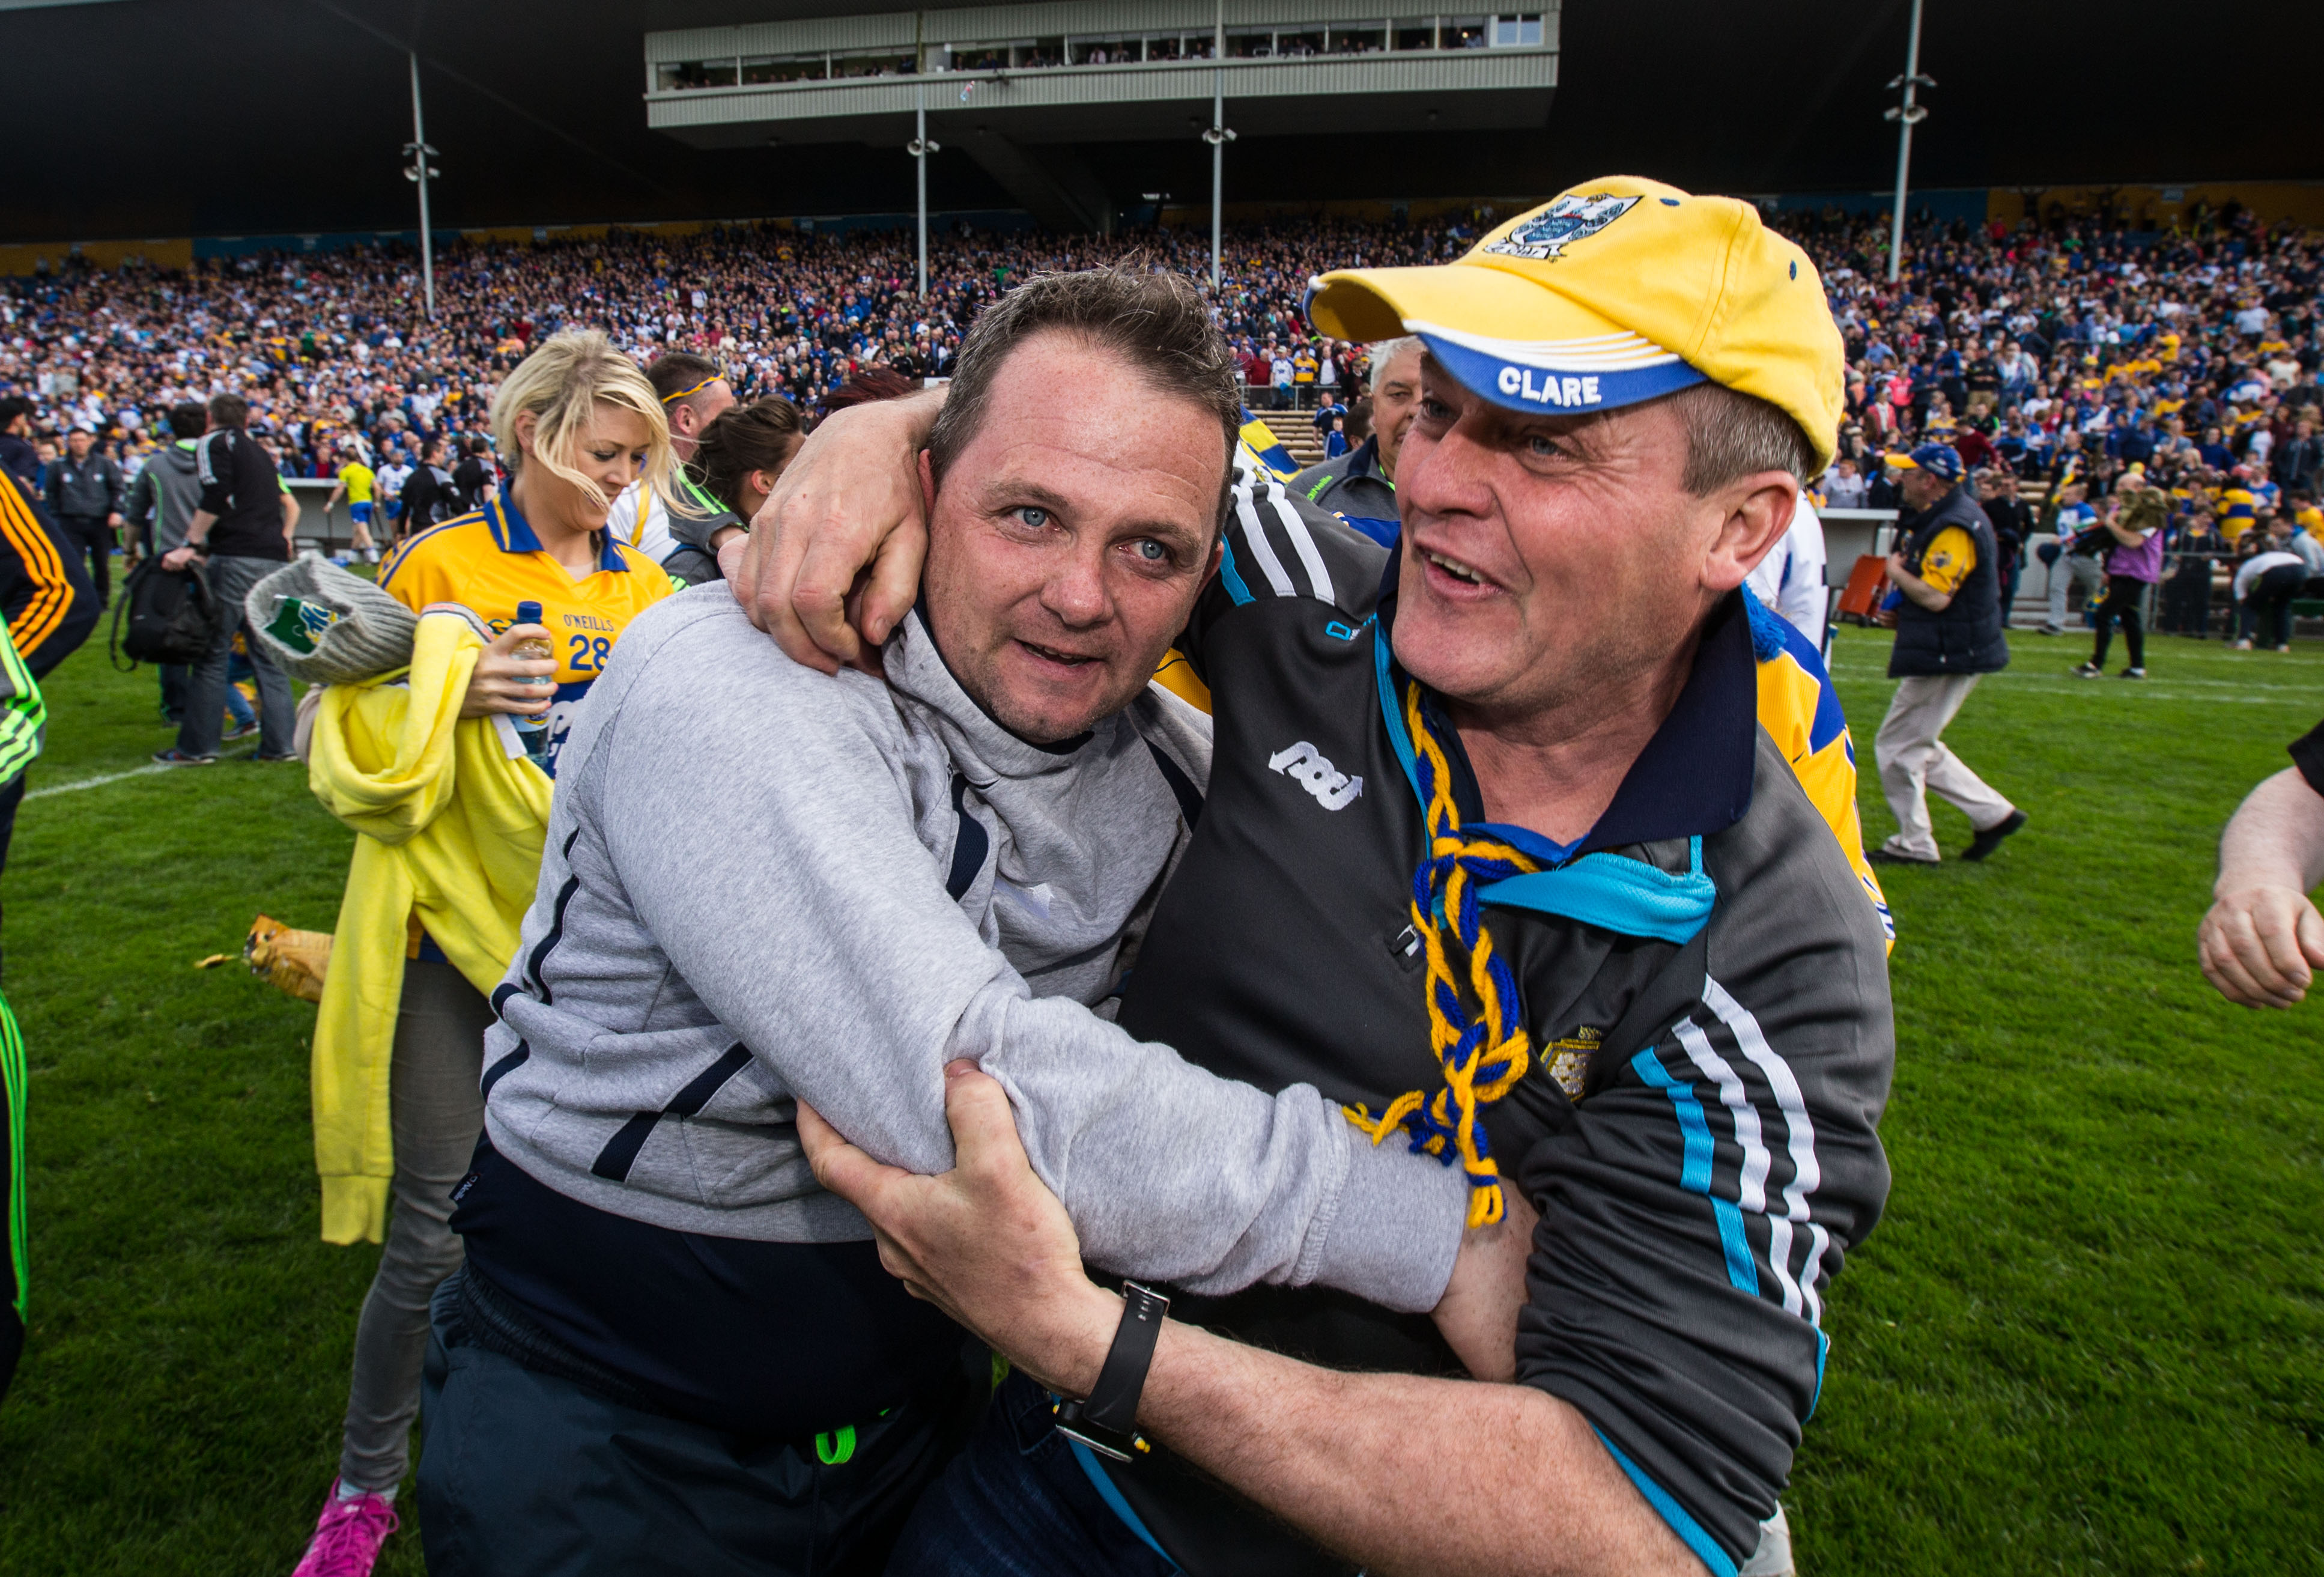 Allianz Hurling League Division 1 Final Replay, Semple Stadium, Thurles, Tipperary 8/5/2016 Clare vs Waterford Clare supporters congratulate manager Davy Fitzgerald after the final whistle Mandatory Credit ©INPHO/Cathal Noonan